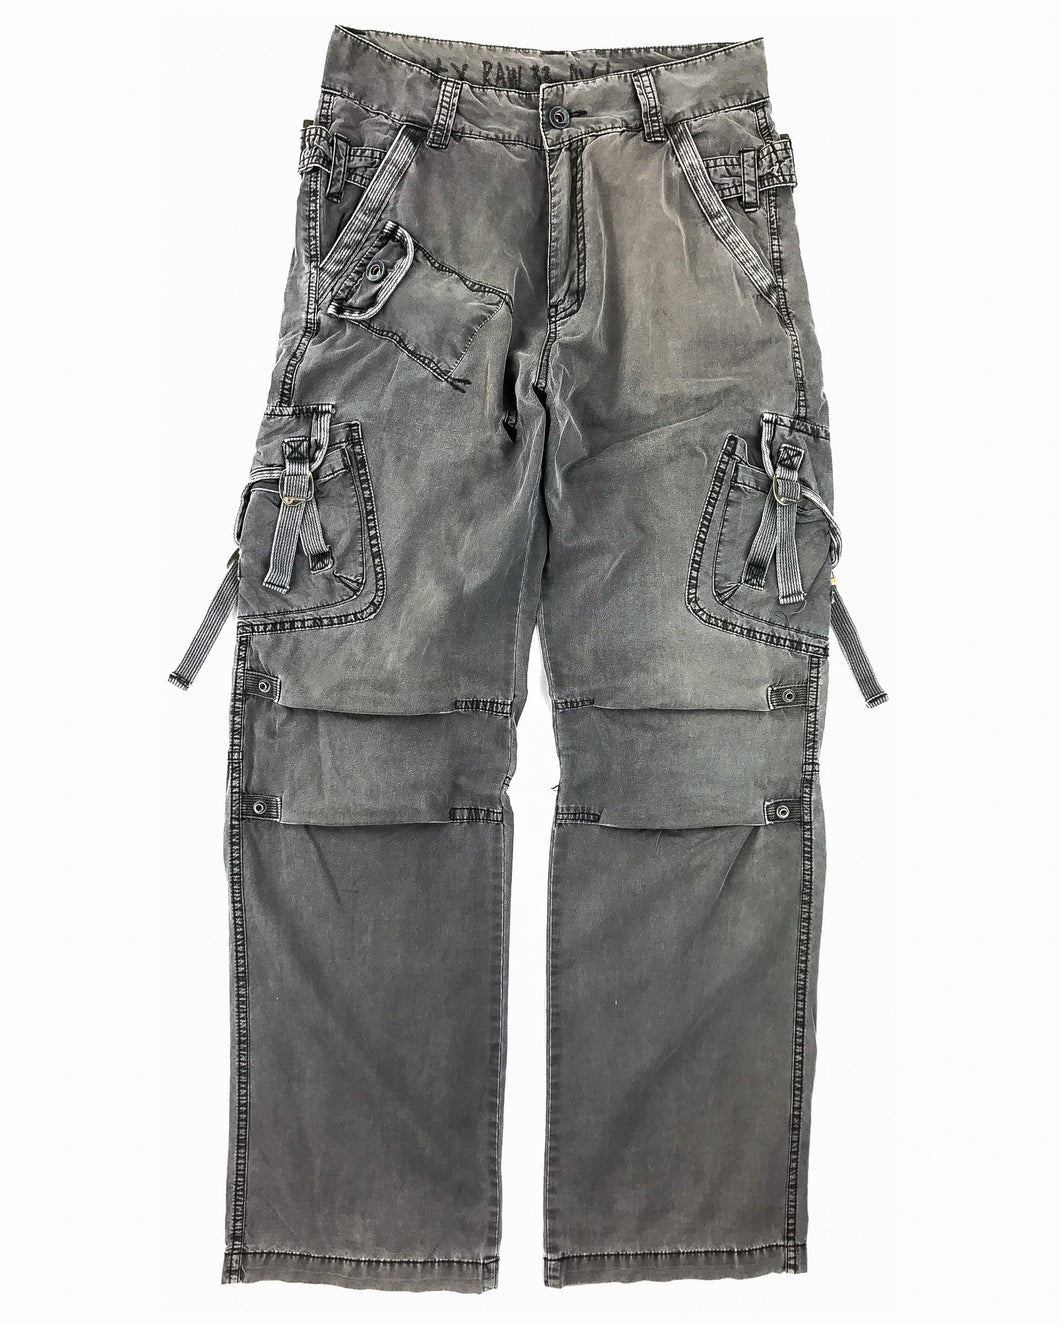 HOSHI DESIGN Stone Washed Military Cargos (Early 2000’s)